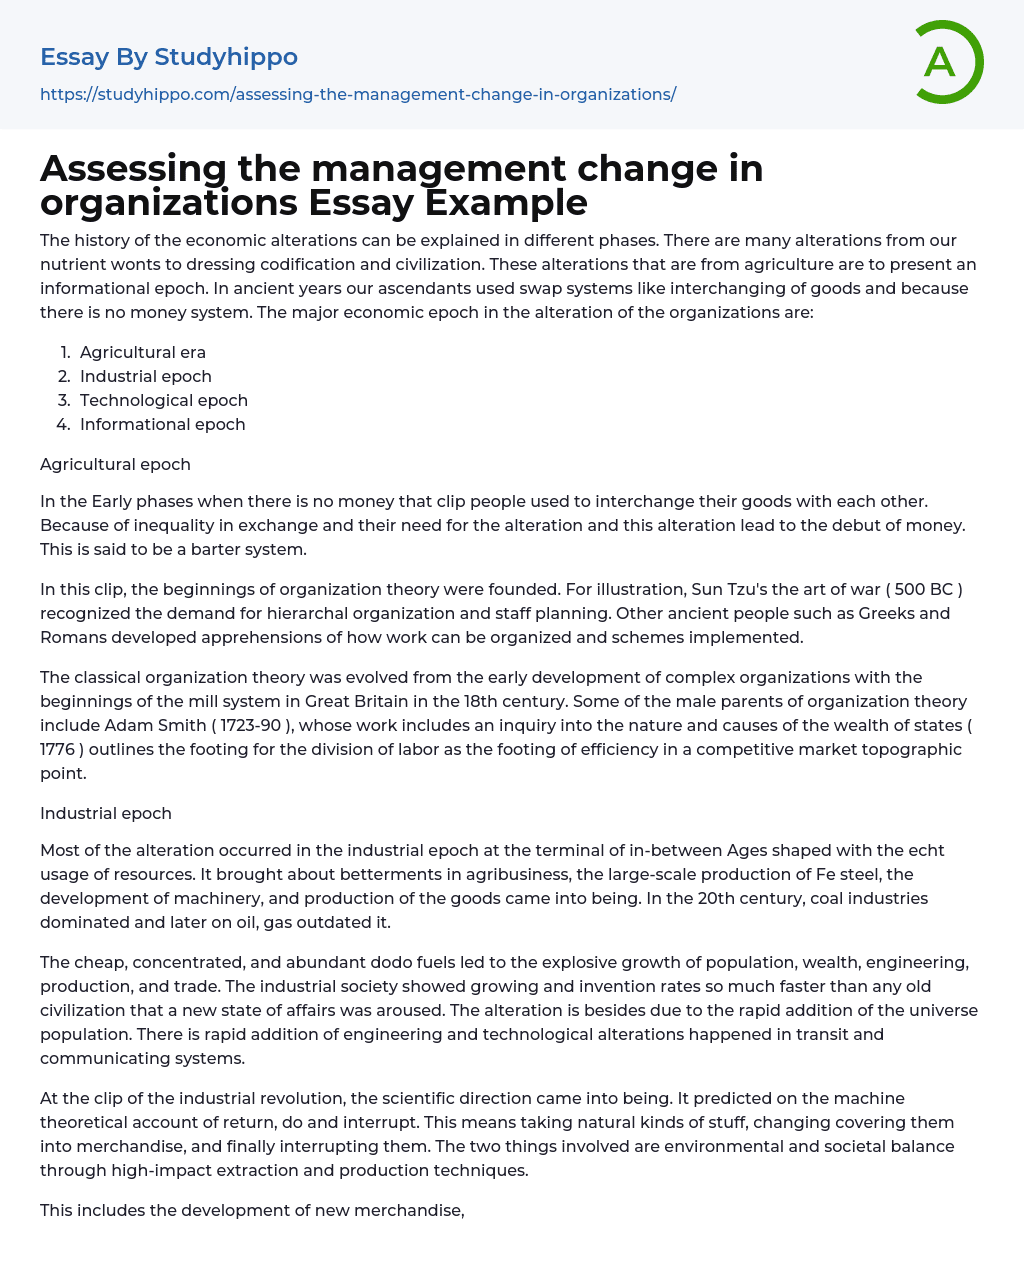 Assessing the management change in organizations Essay Example